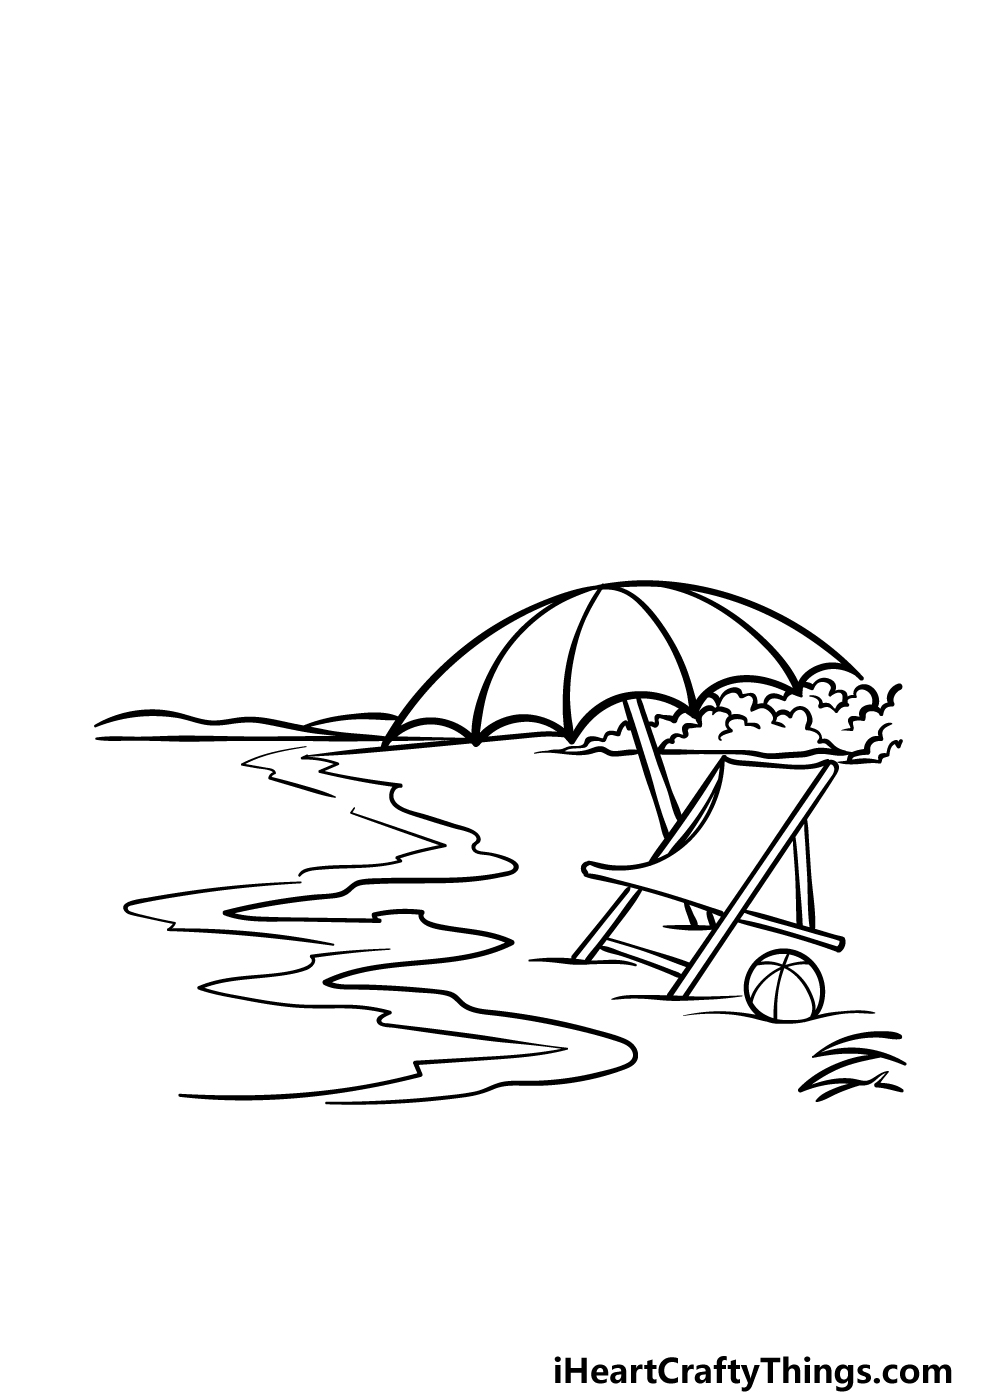 how to draw a Beach step 3